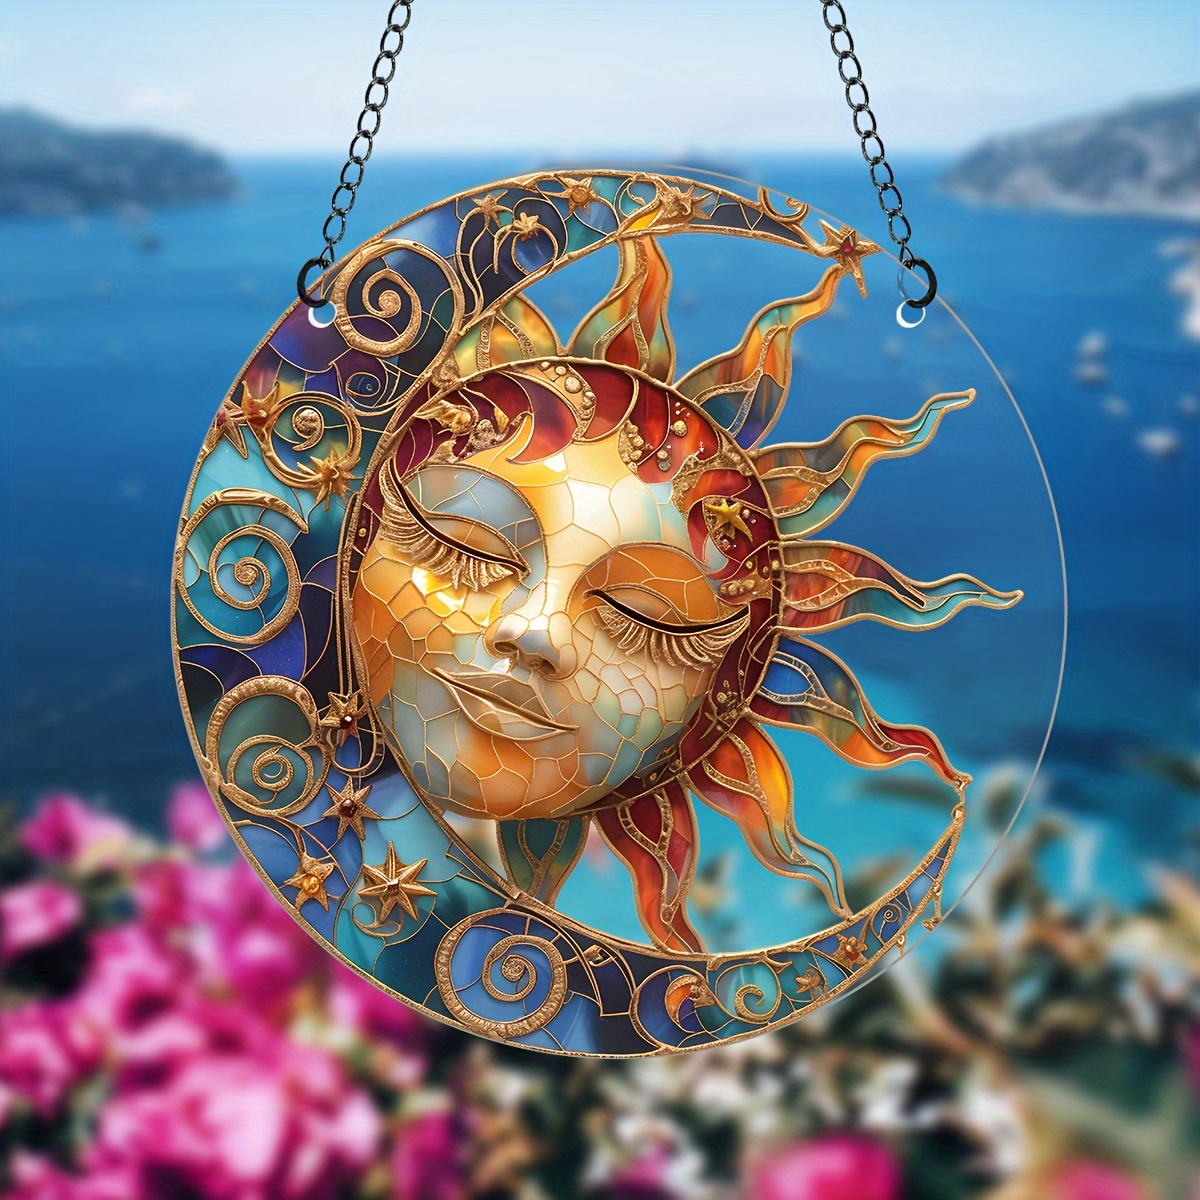 

eternal Cycle" Moon & Sun Acrylic Hanging Decor - 5.9" Transparent Round Pendant, Colorful Artistic Home Accent For Bedroom, Living Room, And Window Sill